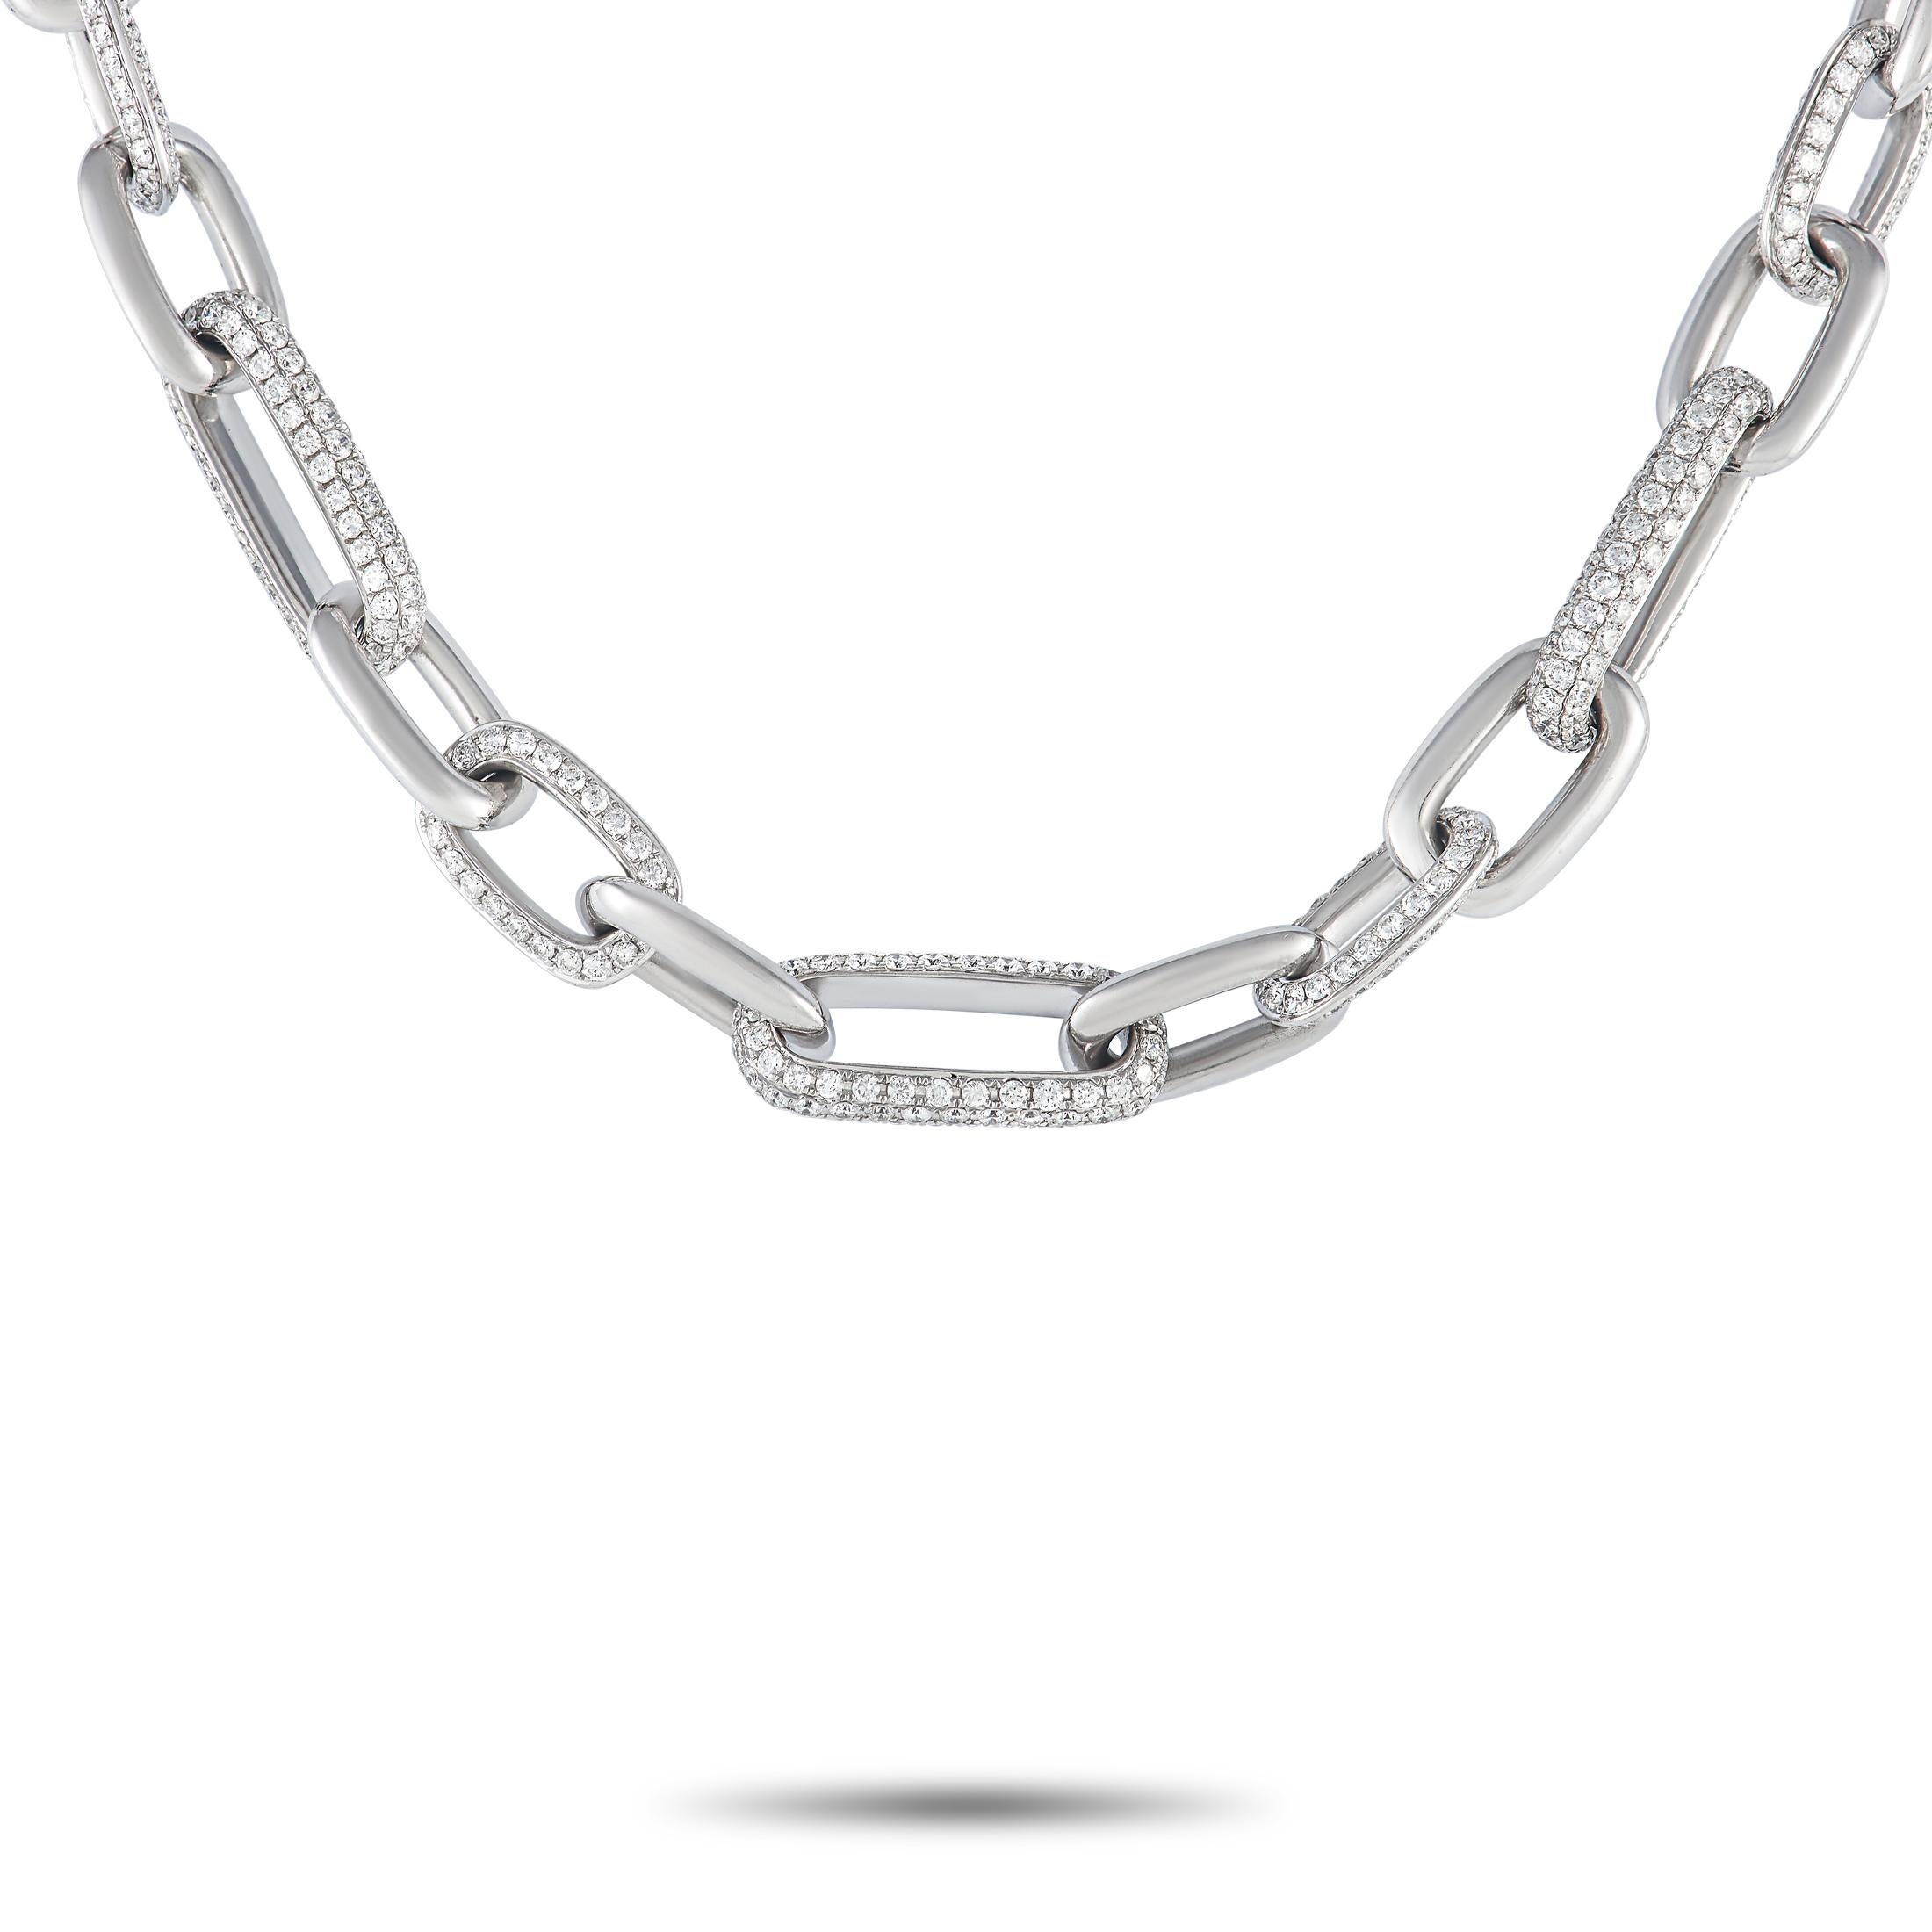 Dress up any outfit effortlessly through the edgy style and sparkle of this link necklace. This piece features a 20-inch long chain of oval links, in alternating solid white gold and diamond-encrusted links. This versatile and luxurious neck